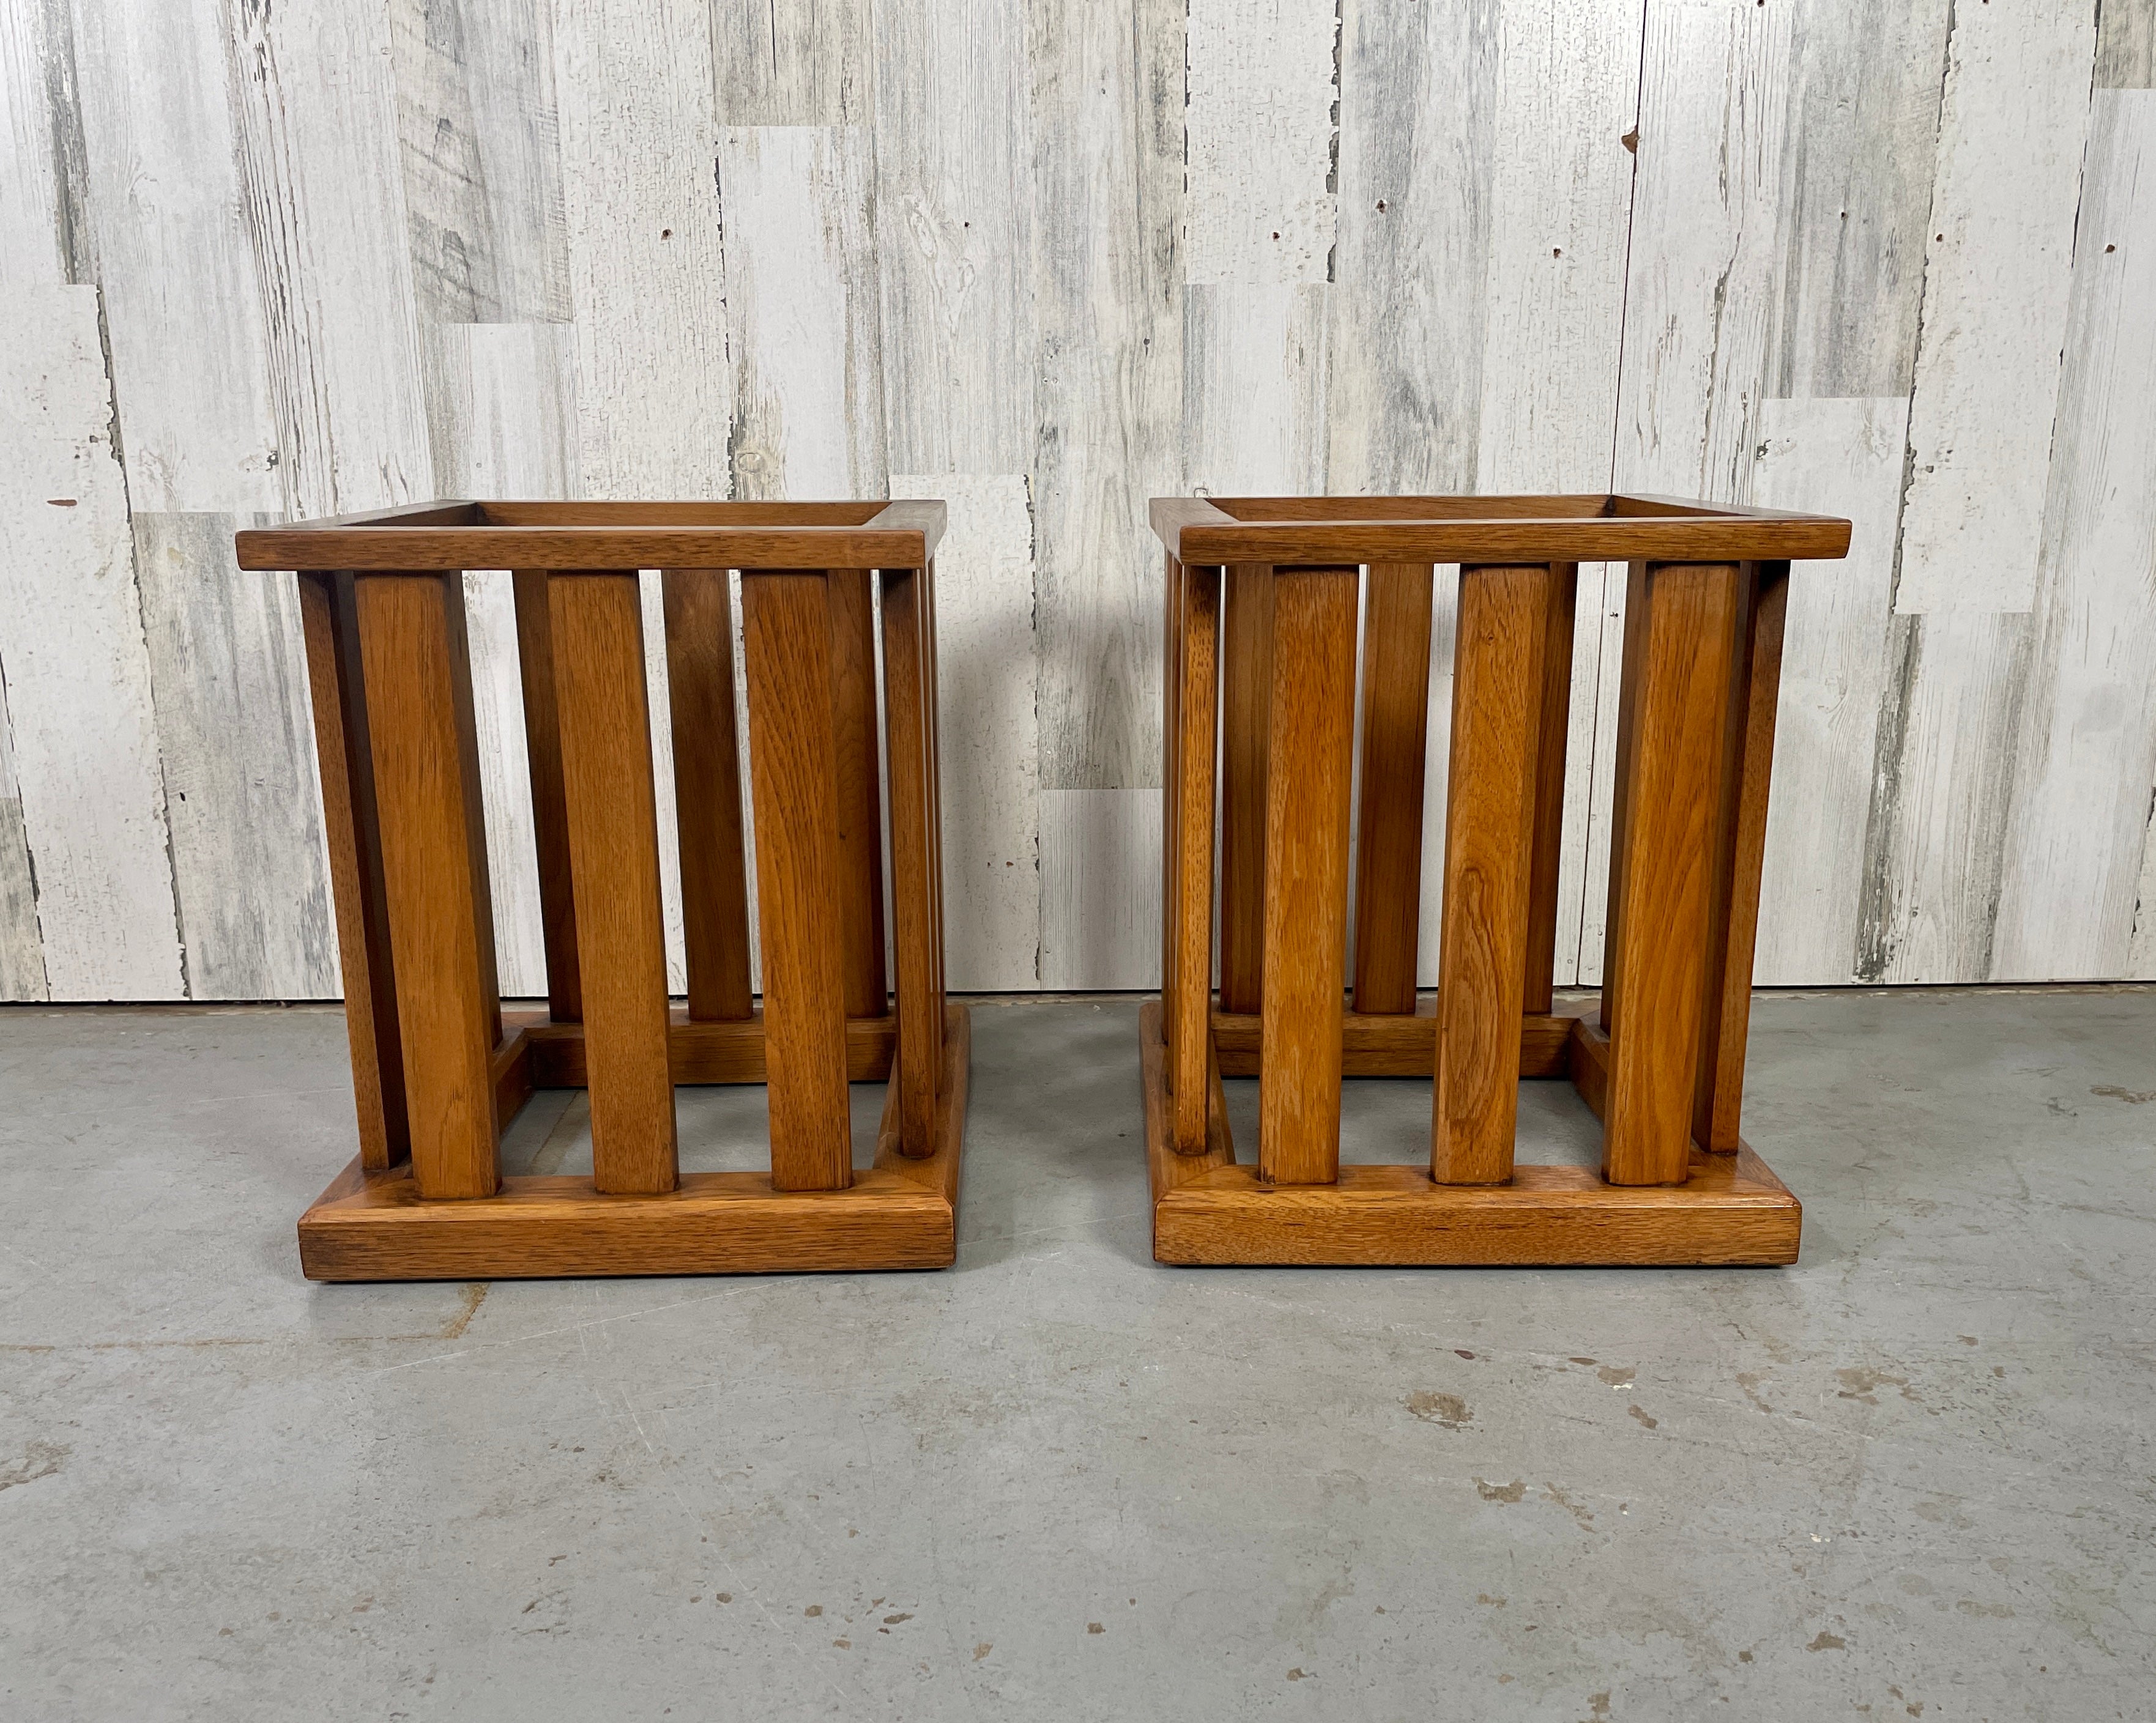 Walnut Slatted Side Tables. These tables would look great with a glass or smoked glass top. 
Top opening measures 12.25 x 12.25